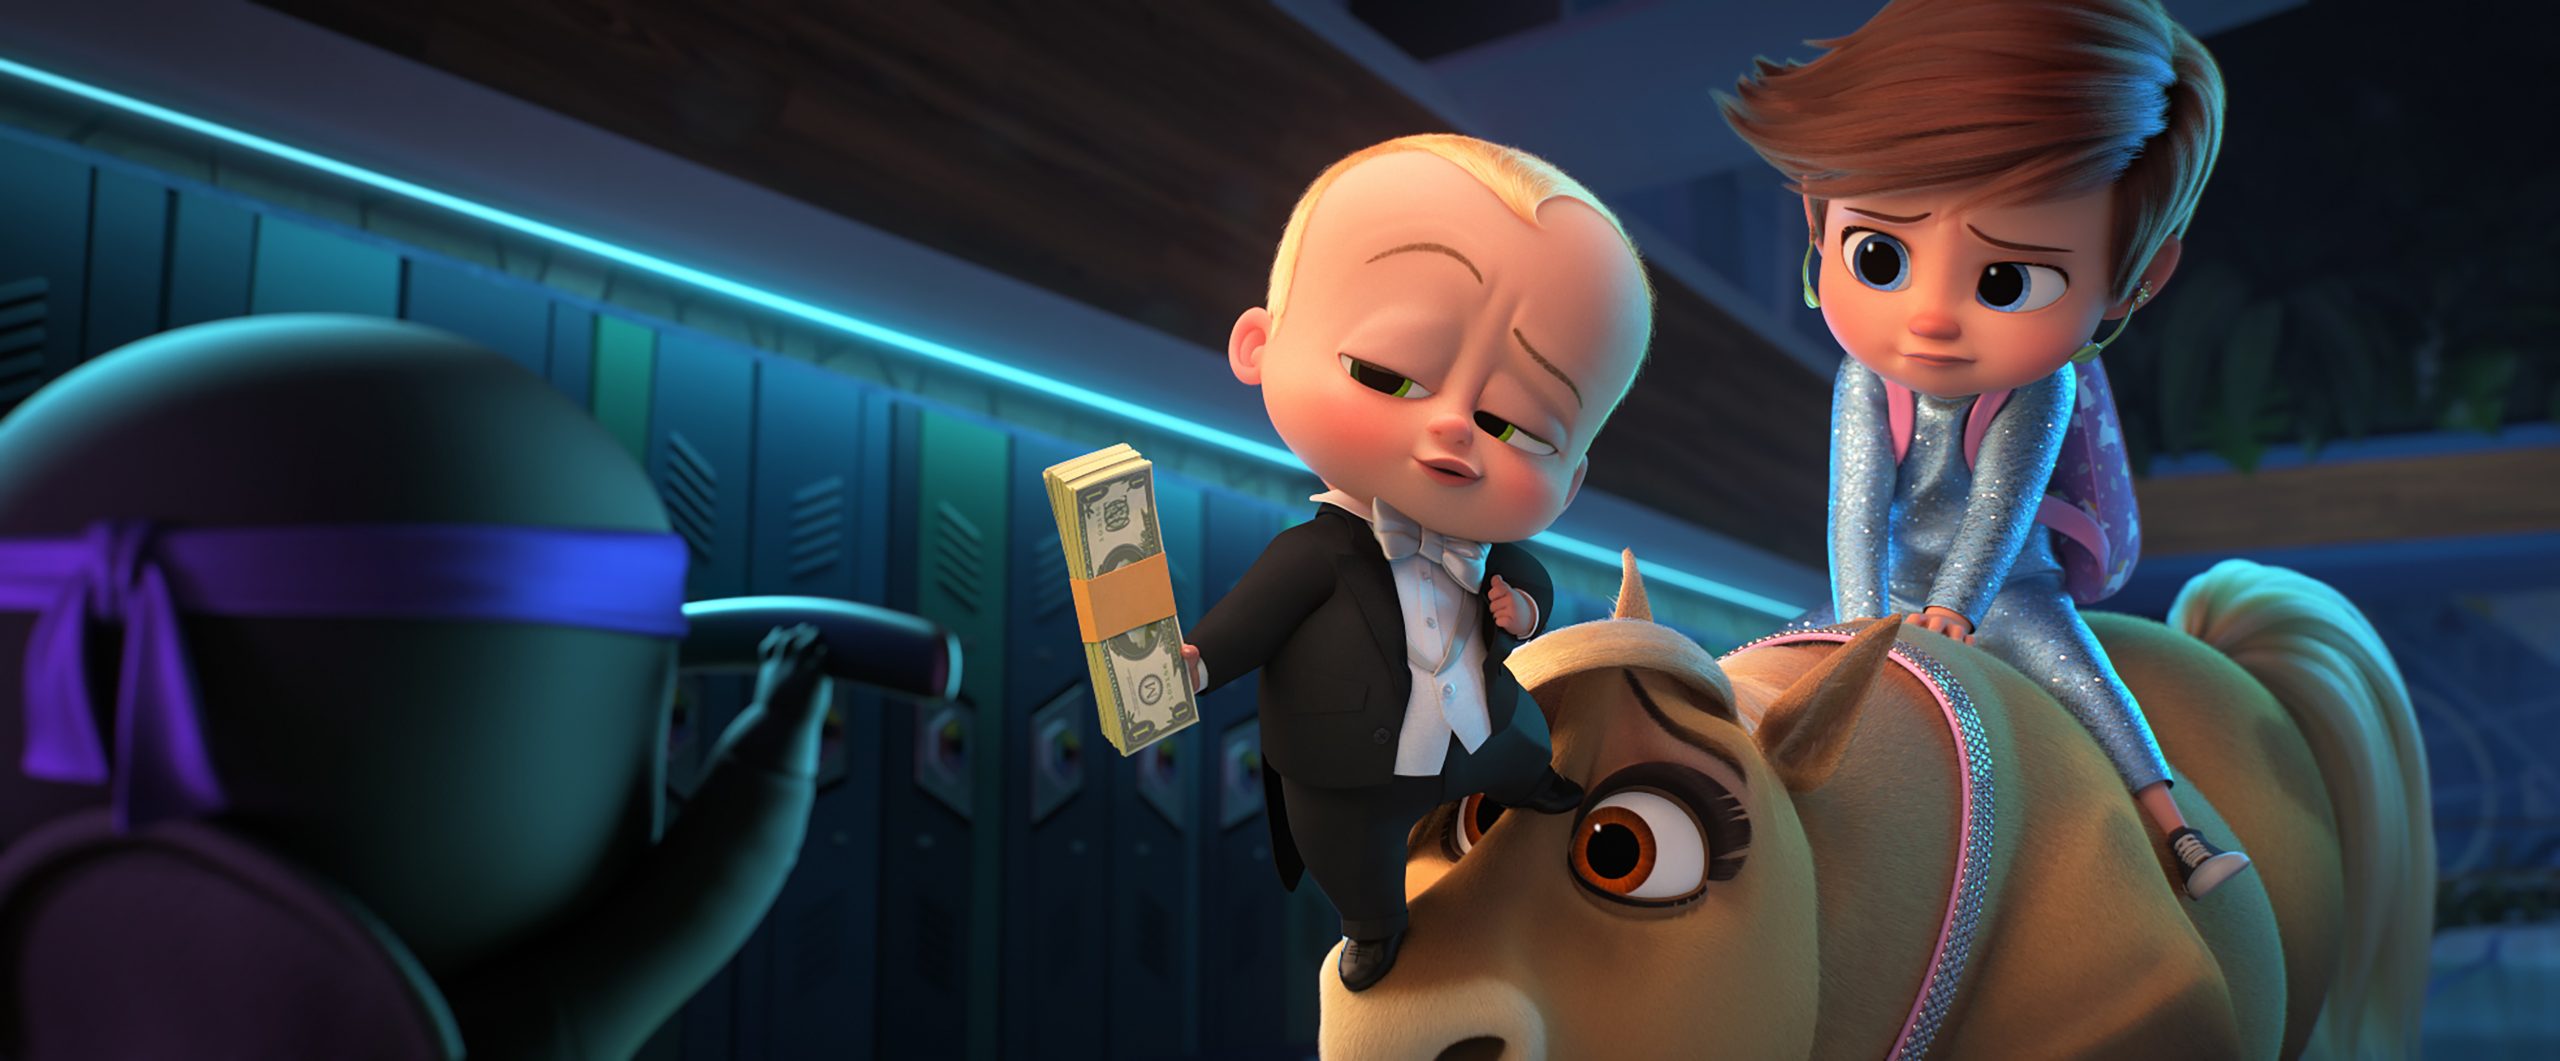 boss baby movie family business